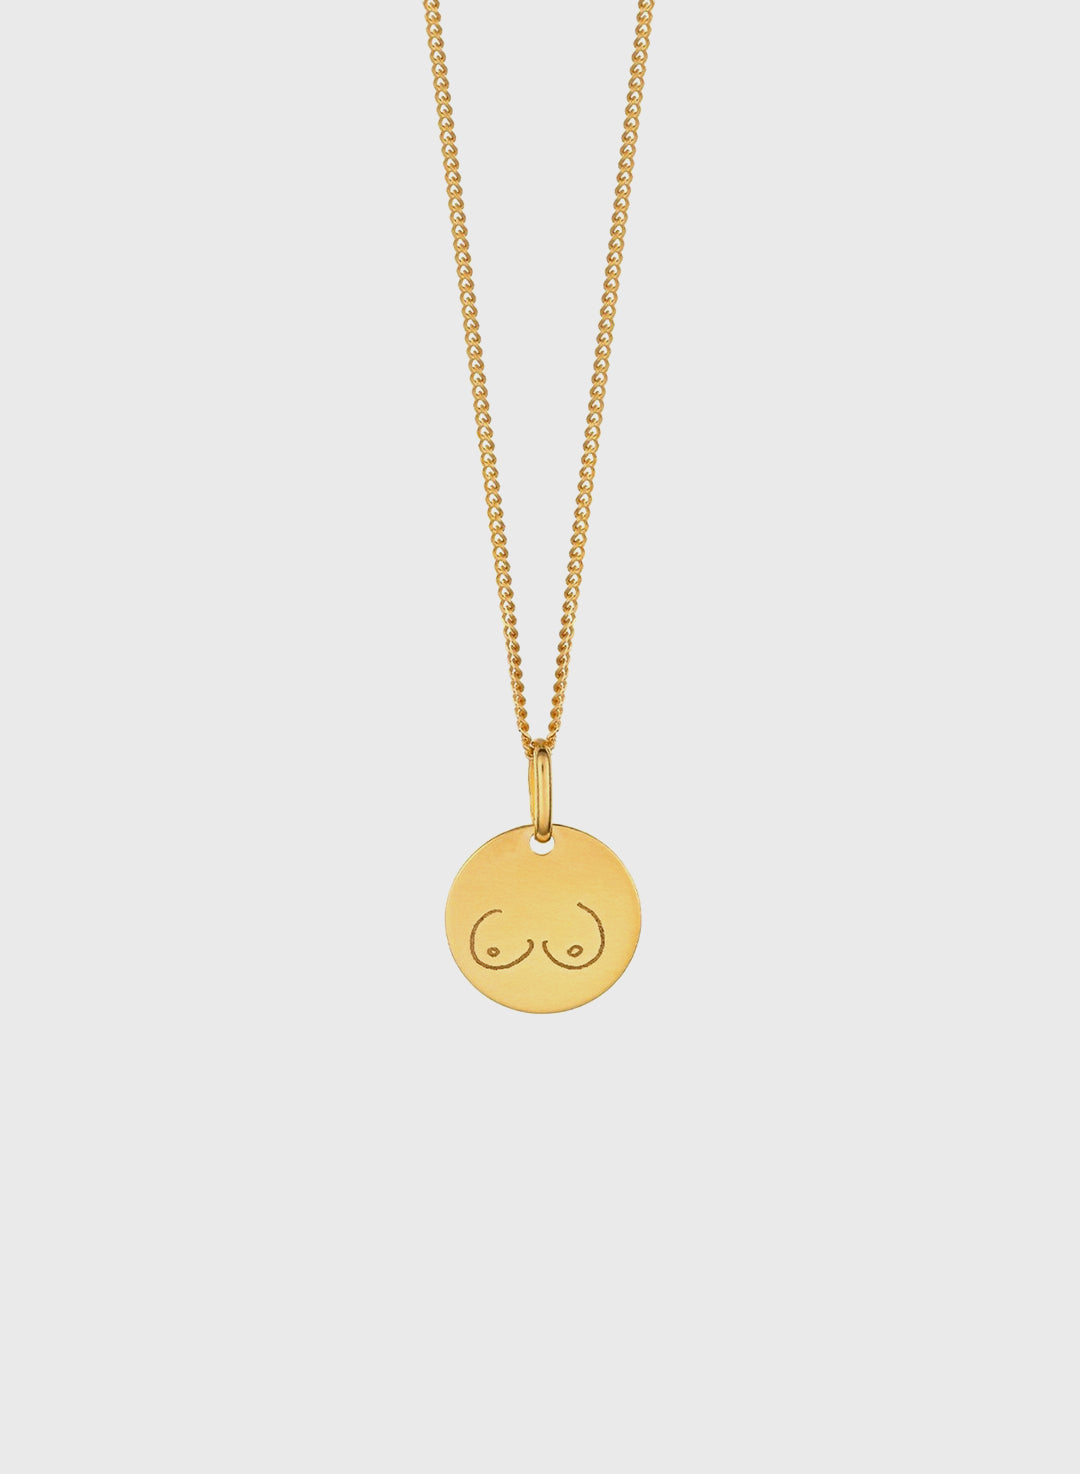 Boobs Pedant Necklace Gold Plated